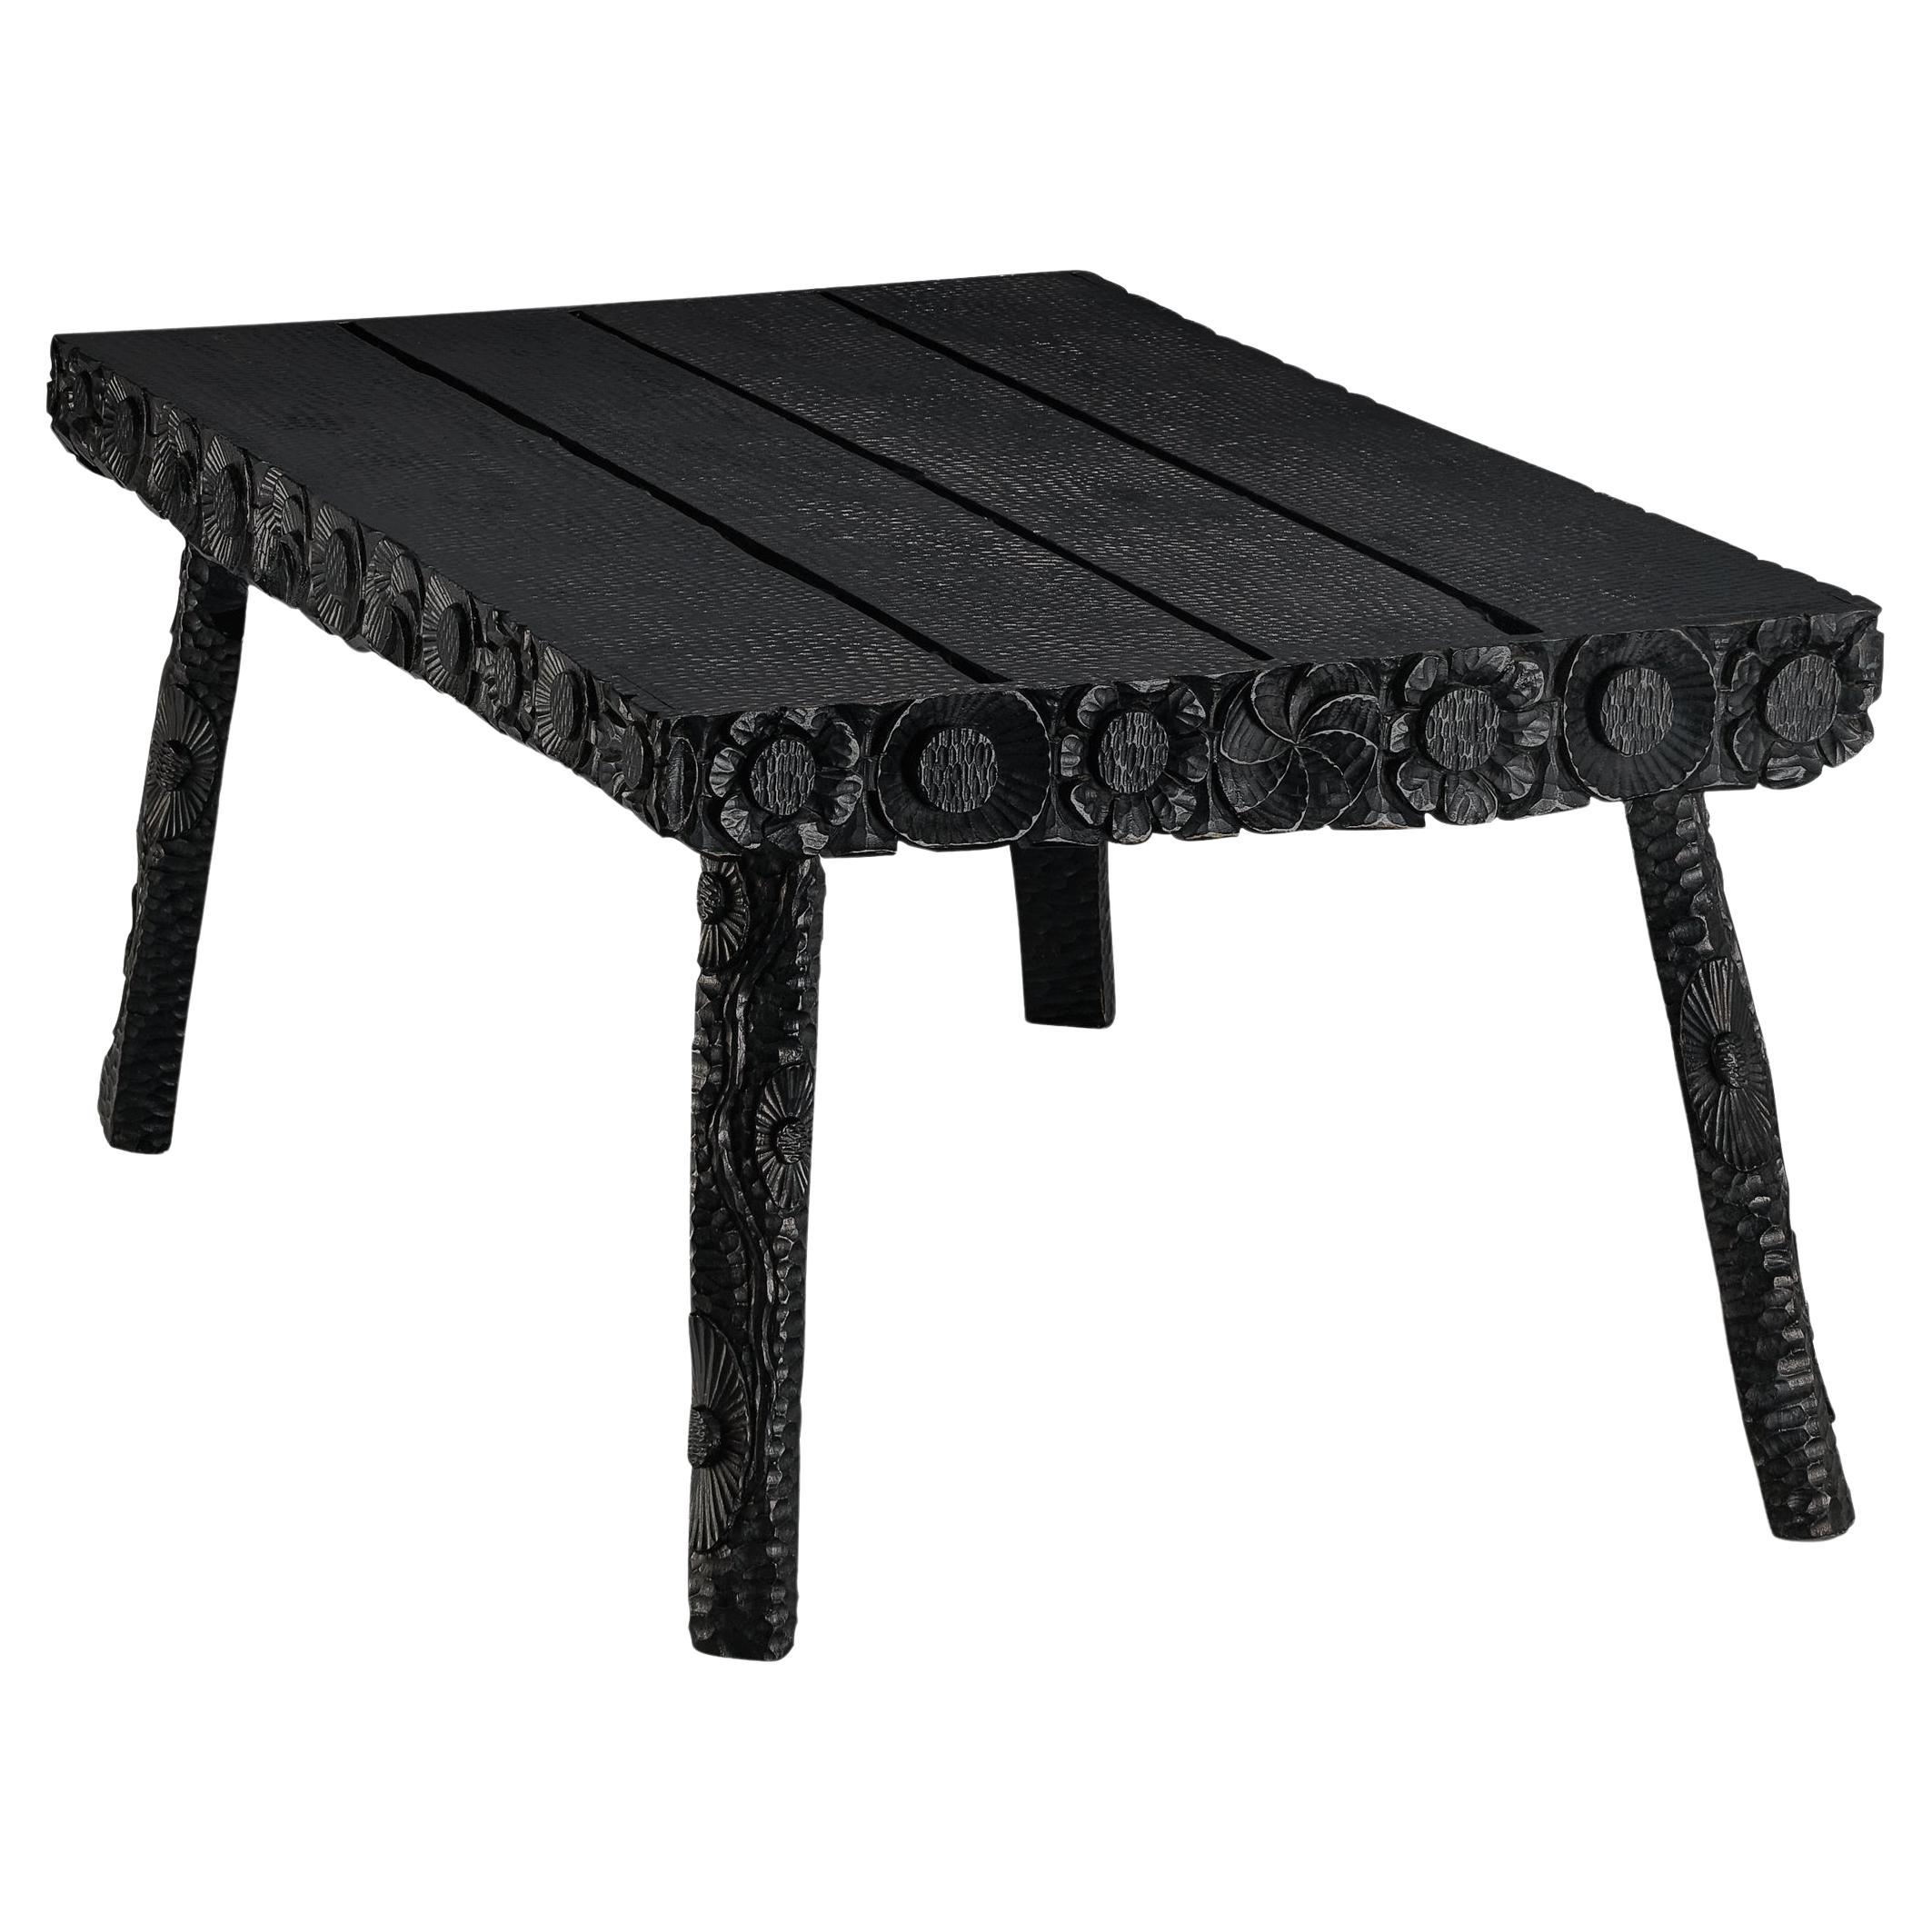 Sculptural Table in Black Lacquered Wood with Decorative Carvings  For Sale